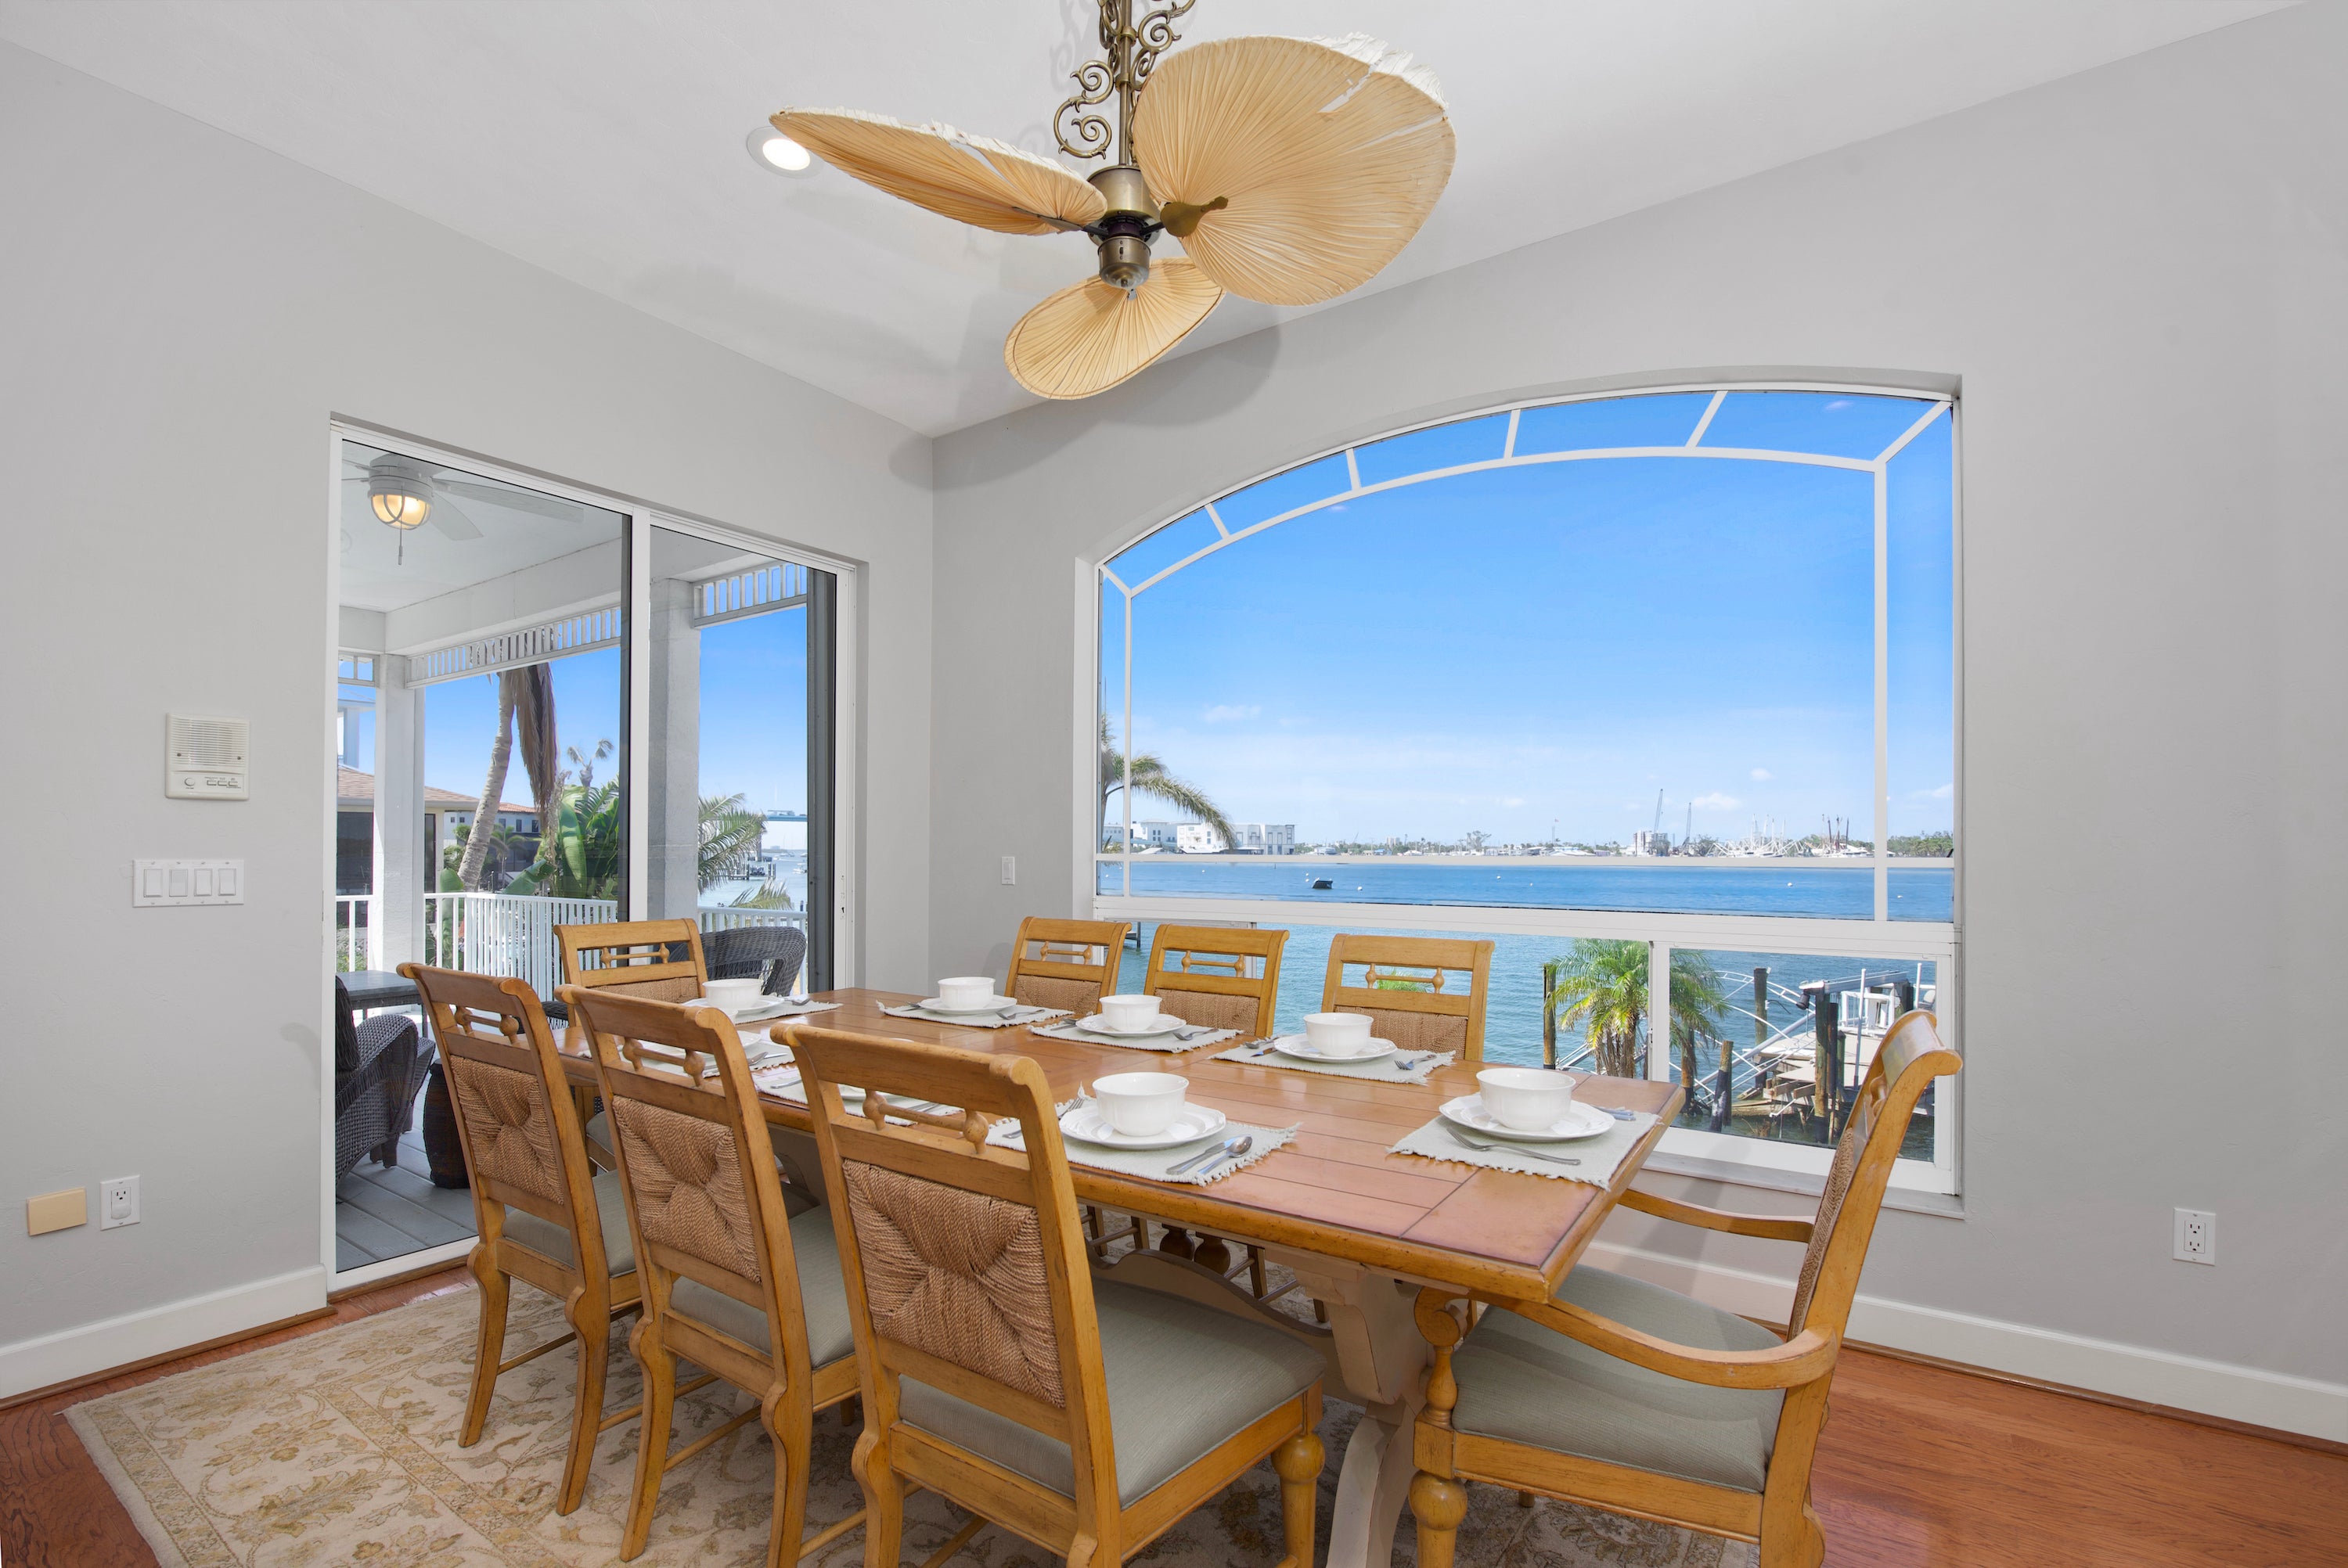 Dining Area with Bay View